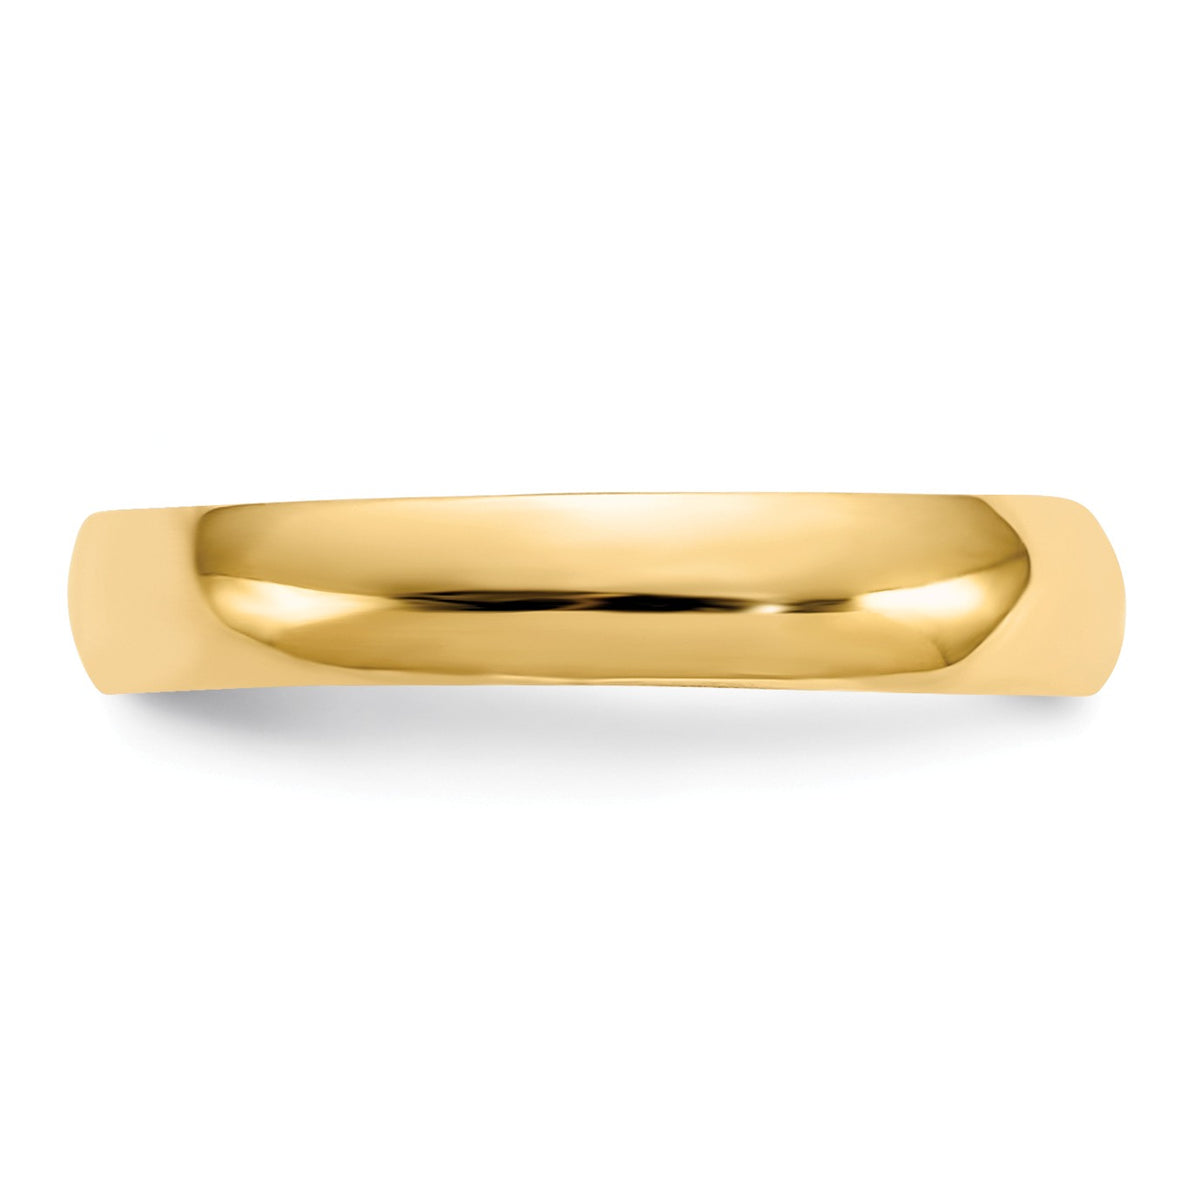 Alternate view of the High Polished Toe Ring in 14 Karat Gold by The Black Bow Jewelry Co.